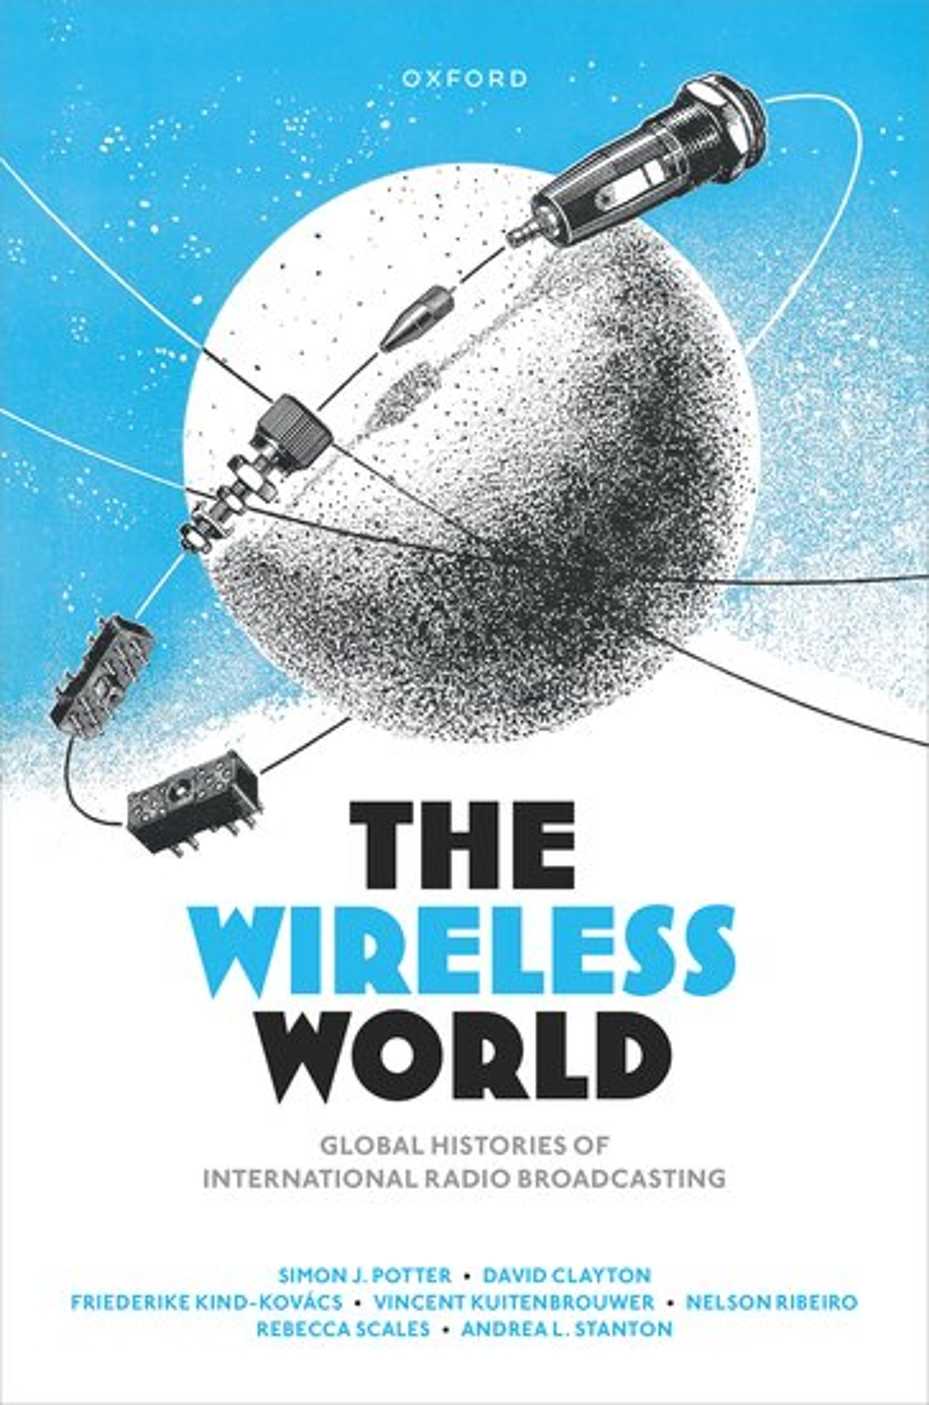 The Wireless World 1945-1975 - Connecting Radio Histories of Decolonization and the Cold War